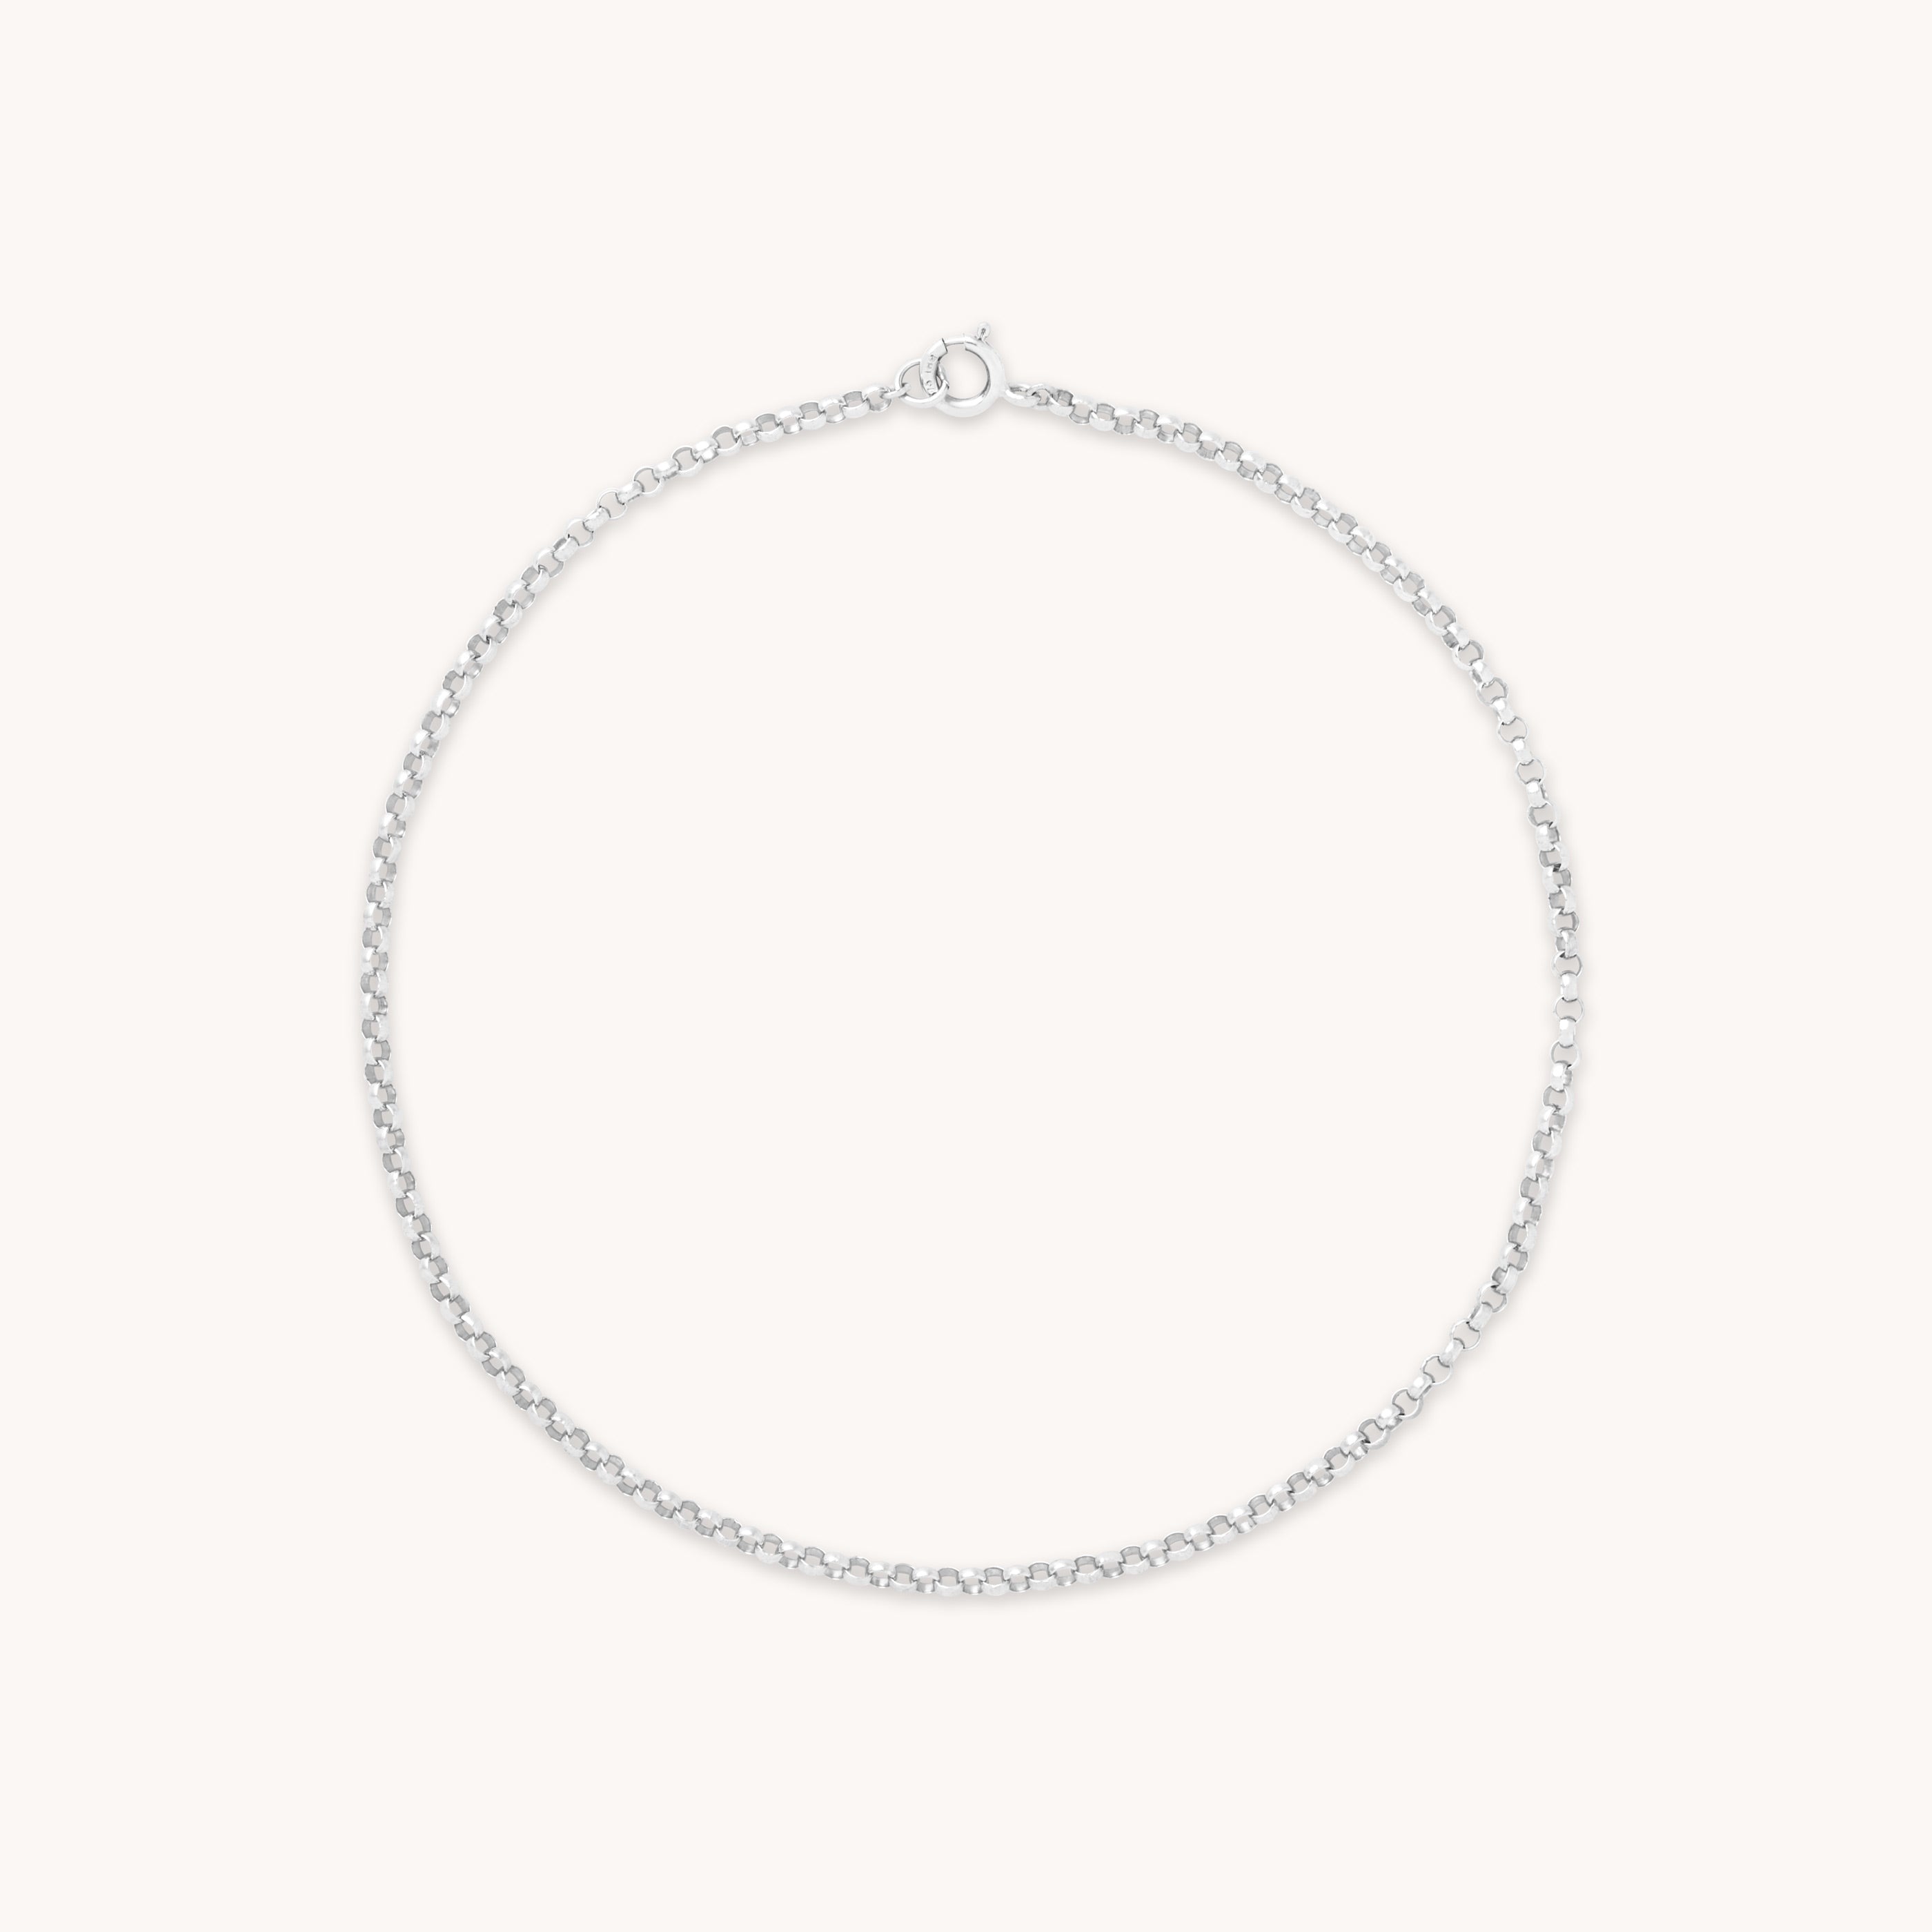 Chelsea Chain Bracelet in Solid White Gold